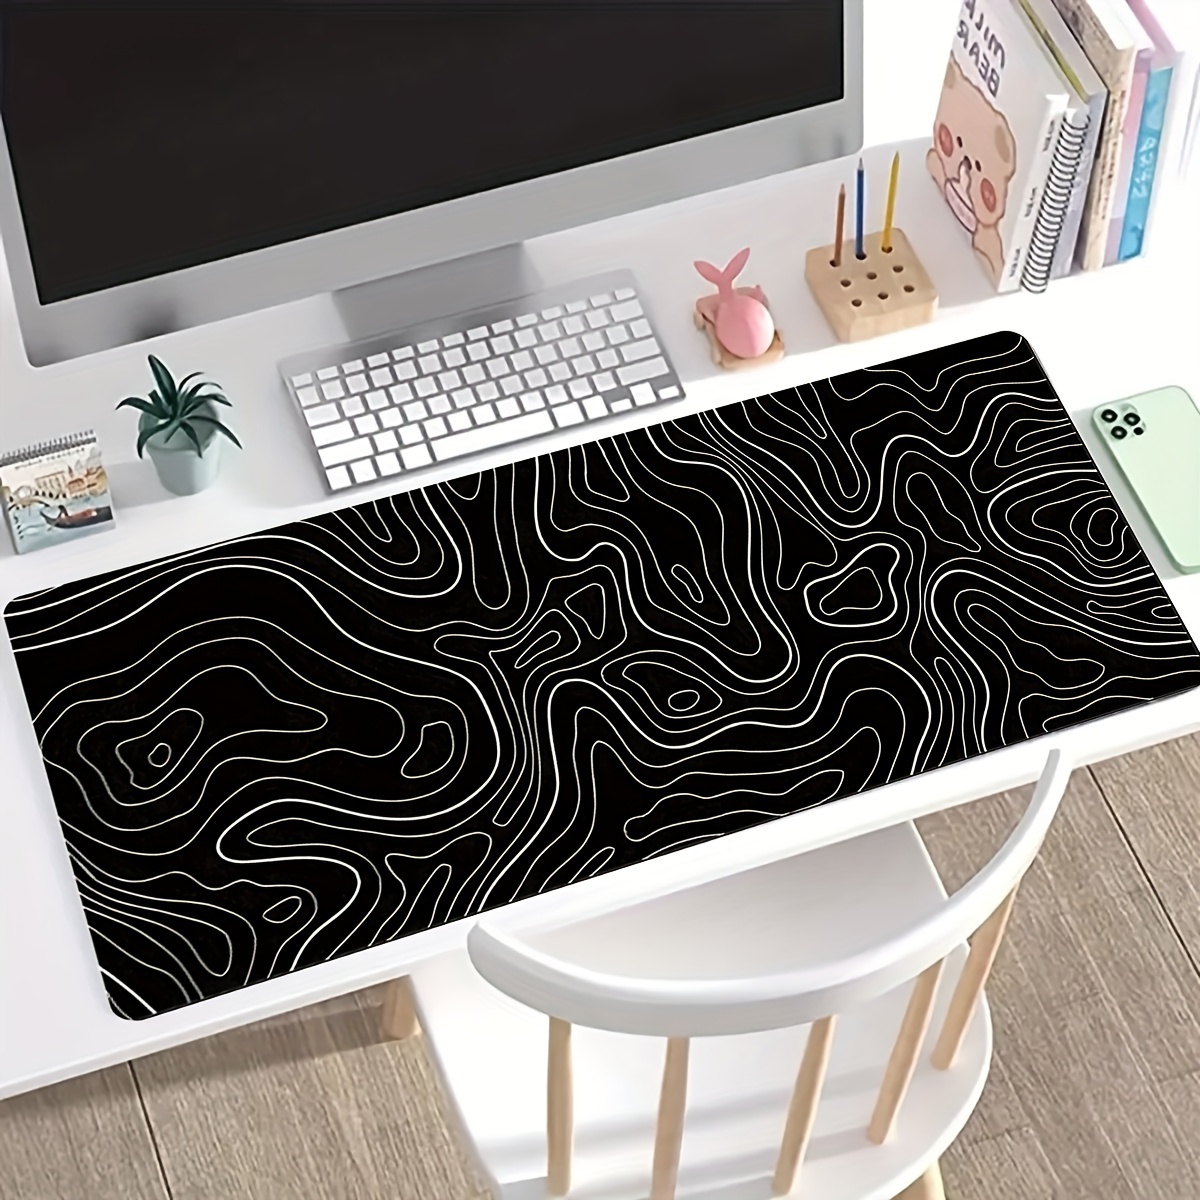 

1pc Gaming Mouse Pad Large Keyboard Pad 31.5 X 11.8in Topographic Mouse Pad Black And White Mouse Pad For Keyboard With Anti-slip Rubber Base, Extended Desk Pad Xl Keyboard Pad Mouse Mat